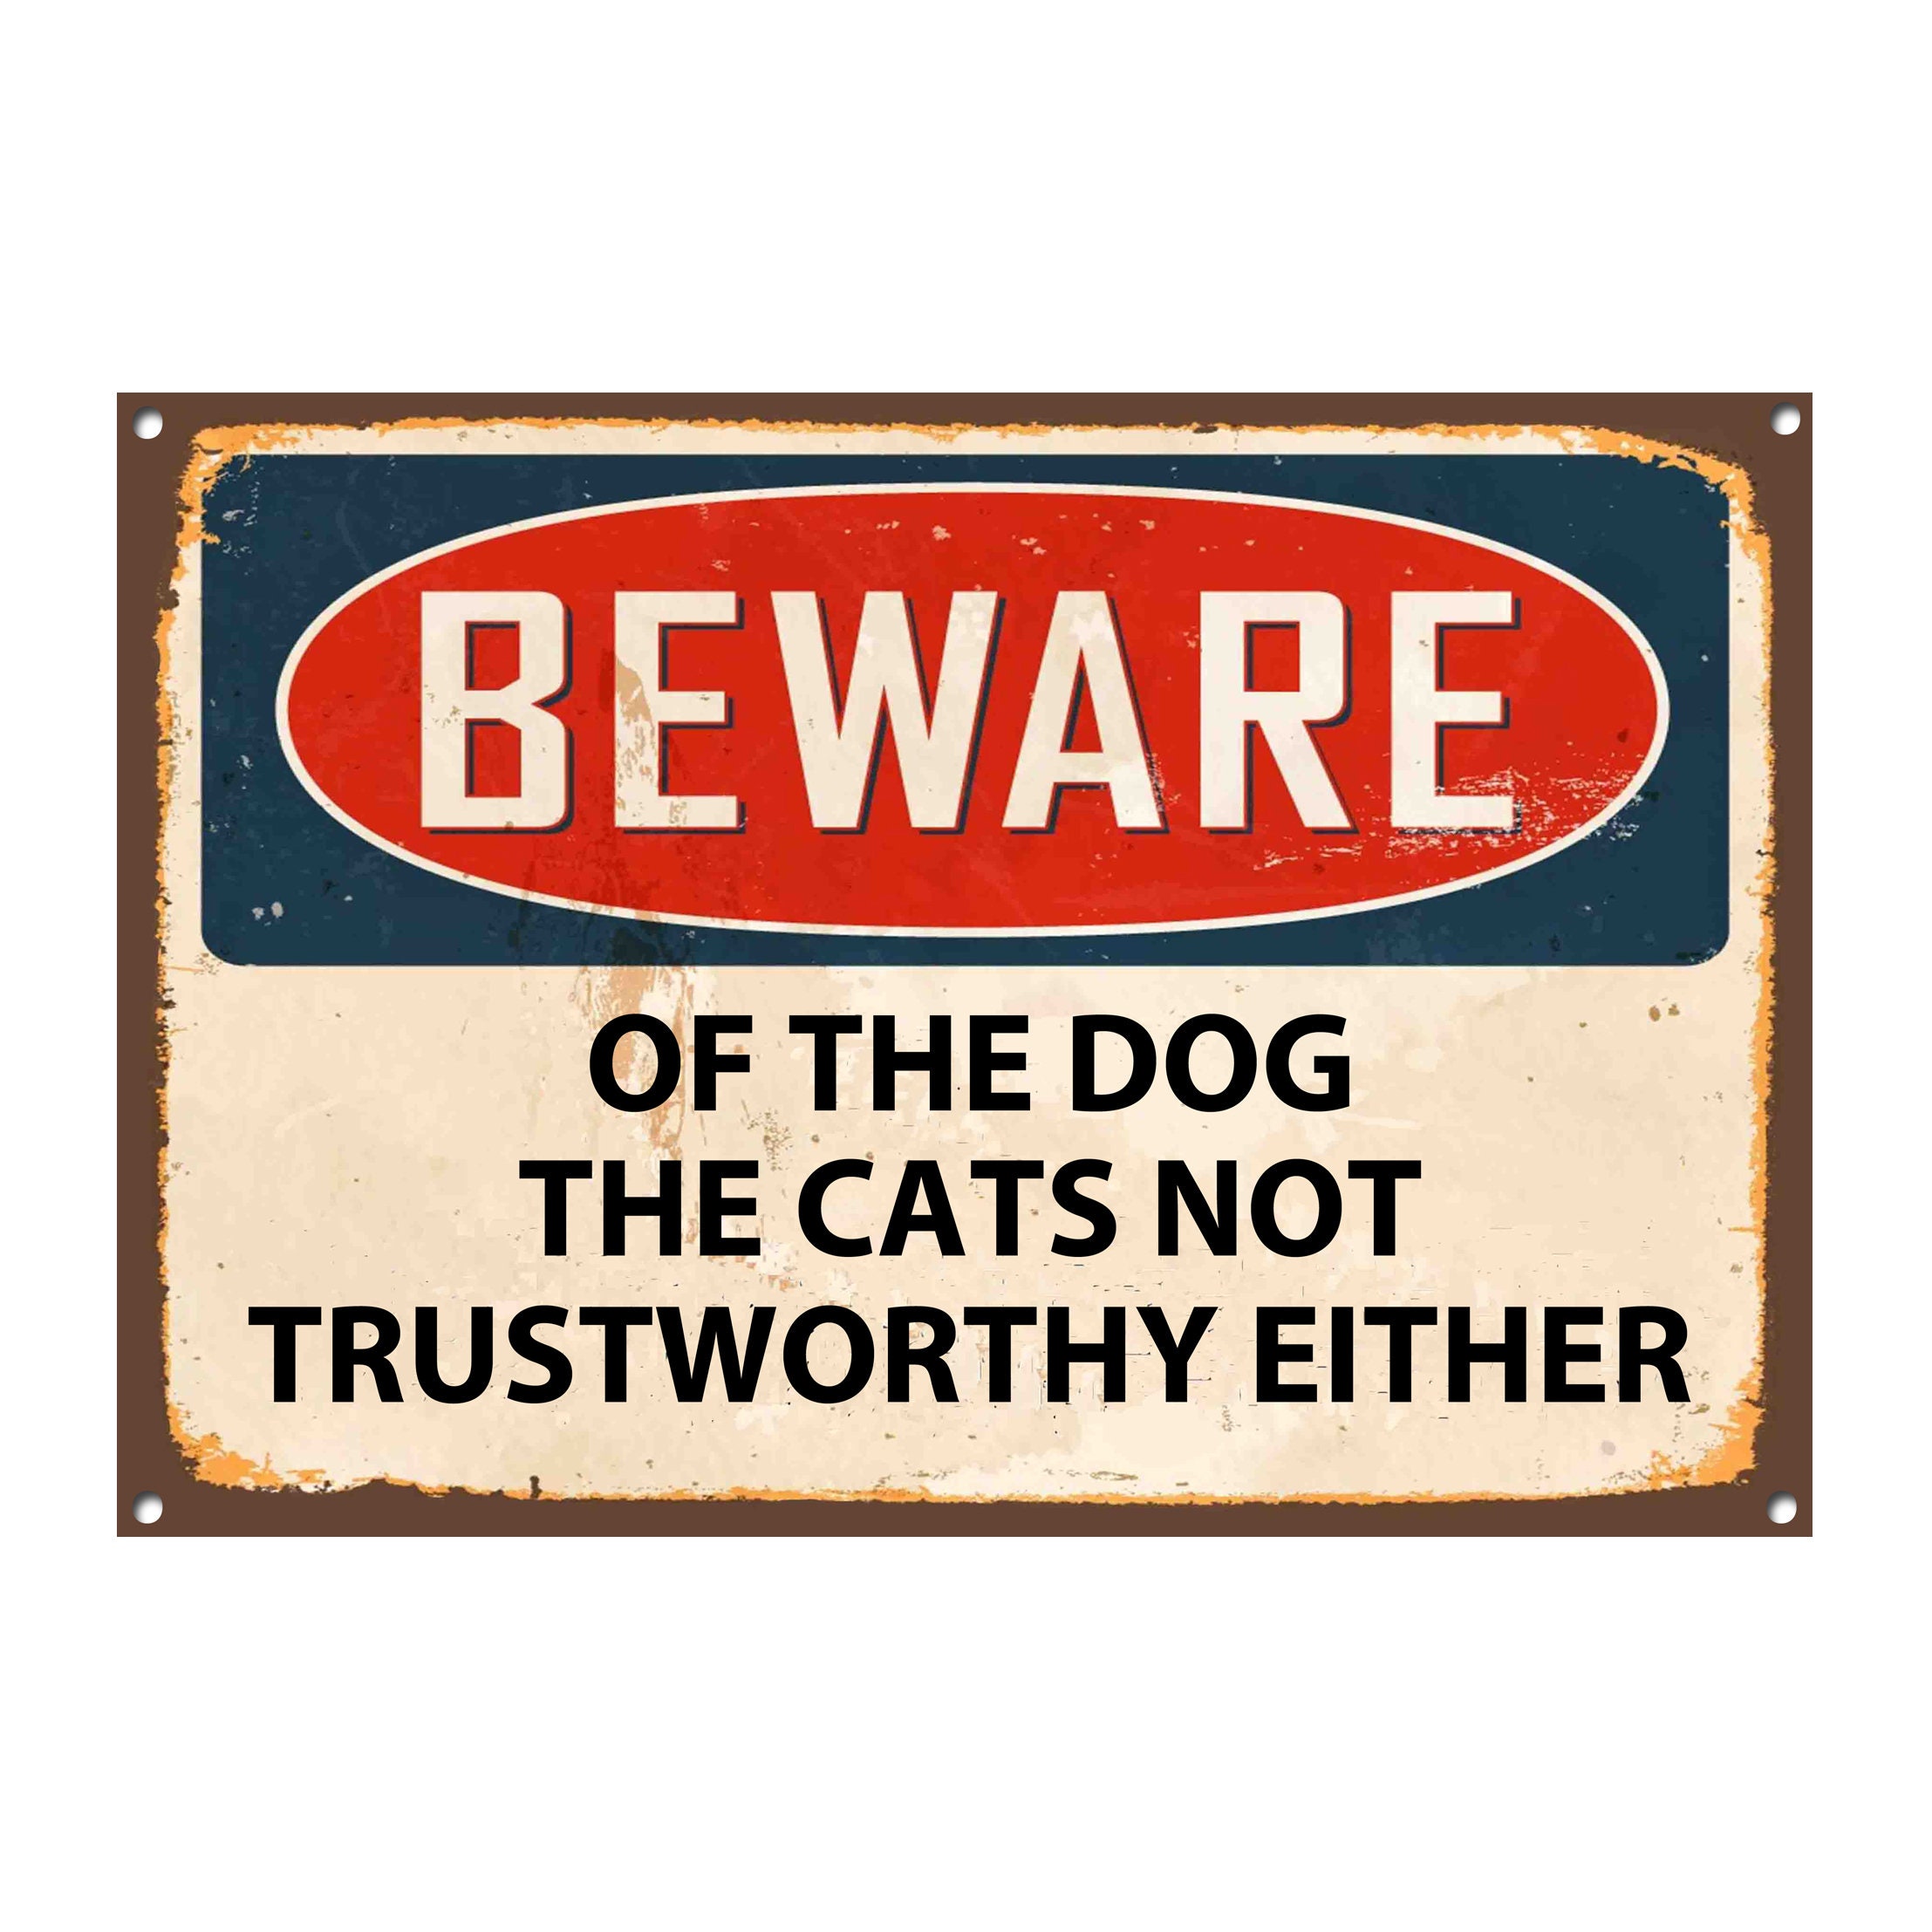 THE CAT IS NOT TRUSTWORTHY EITHER DOOR SIGN GATE BEWARE OF THE DOG FENCE 